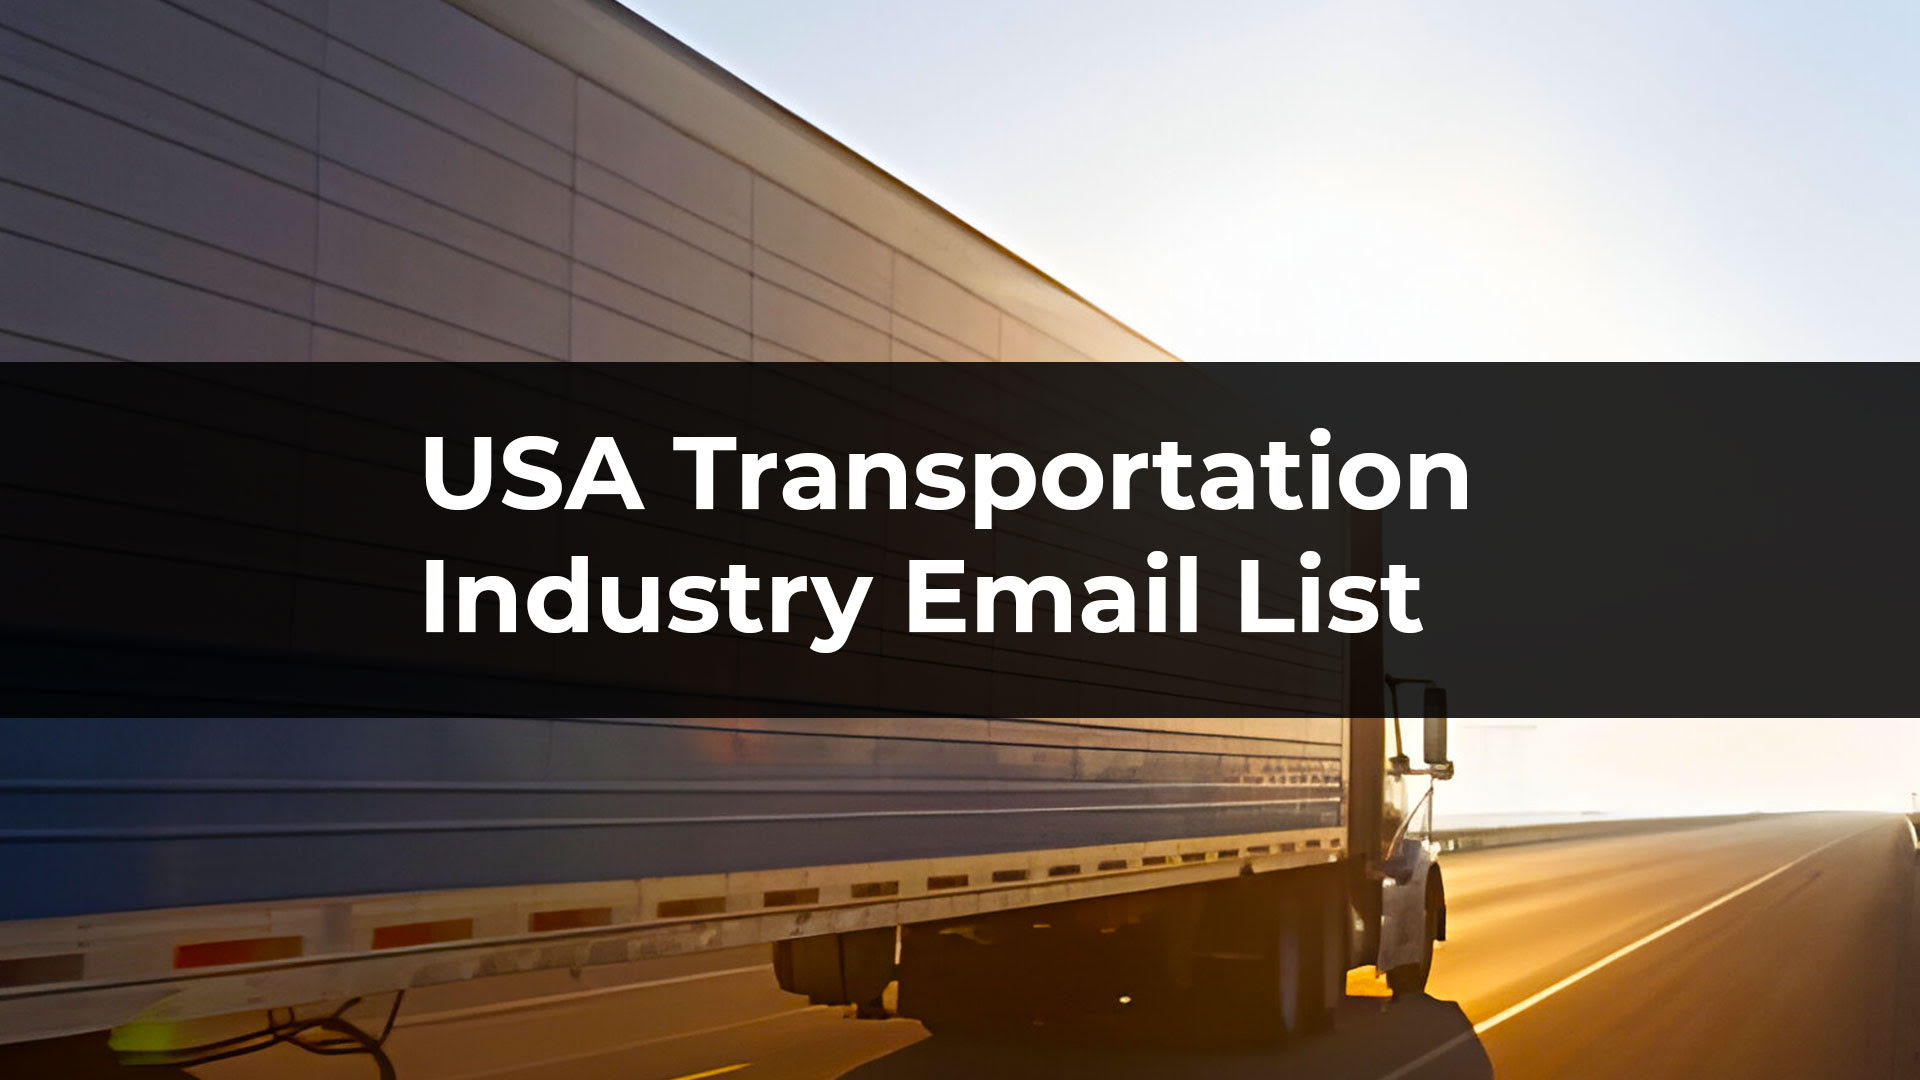 USA Transportation Industry Email List